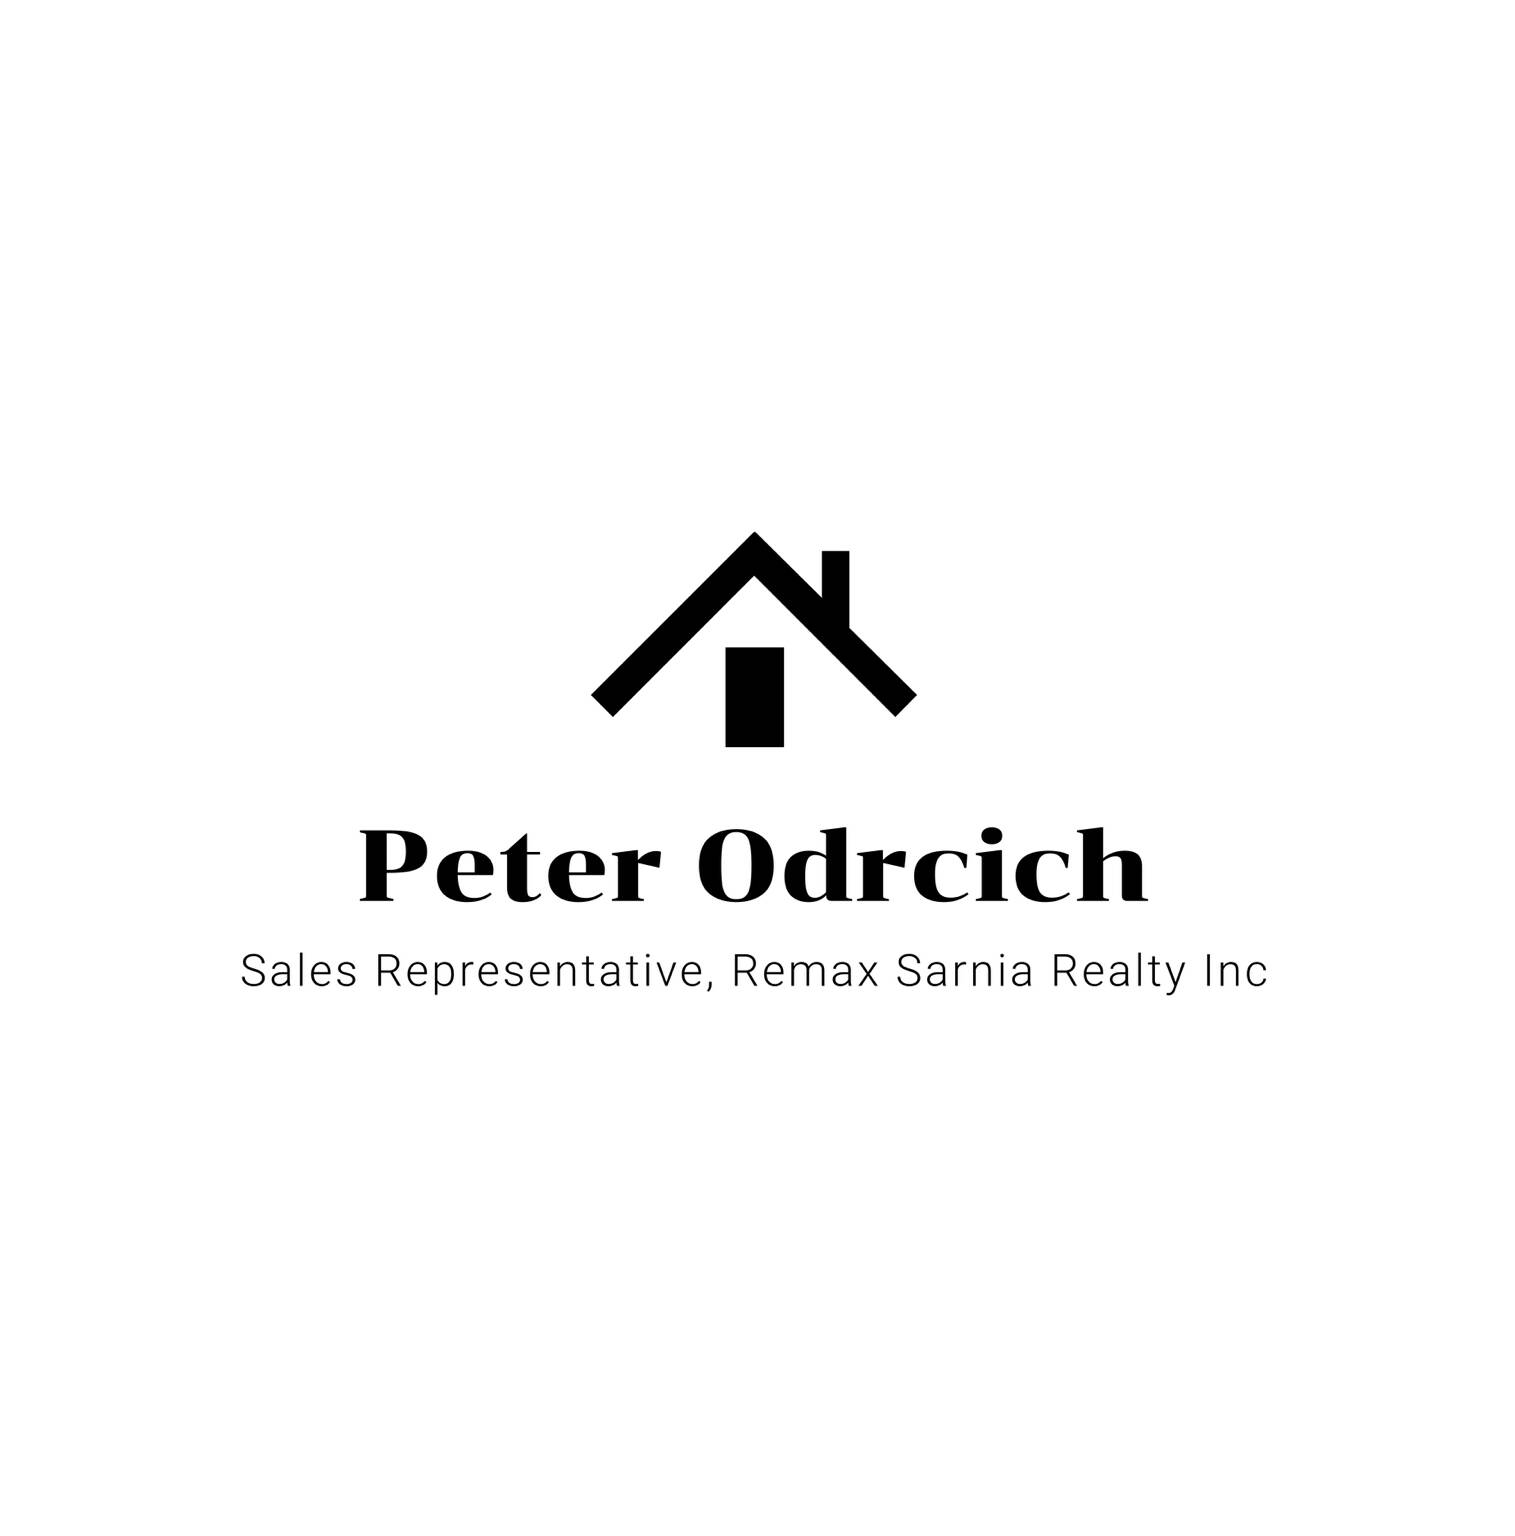 Peter Odrcich - Remax Sarnia Realty Inc. 